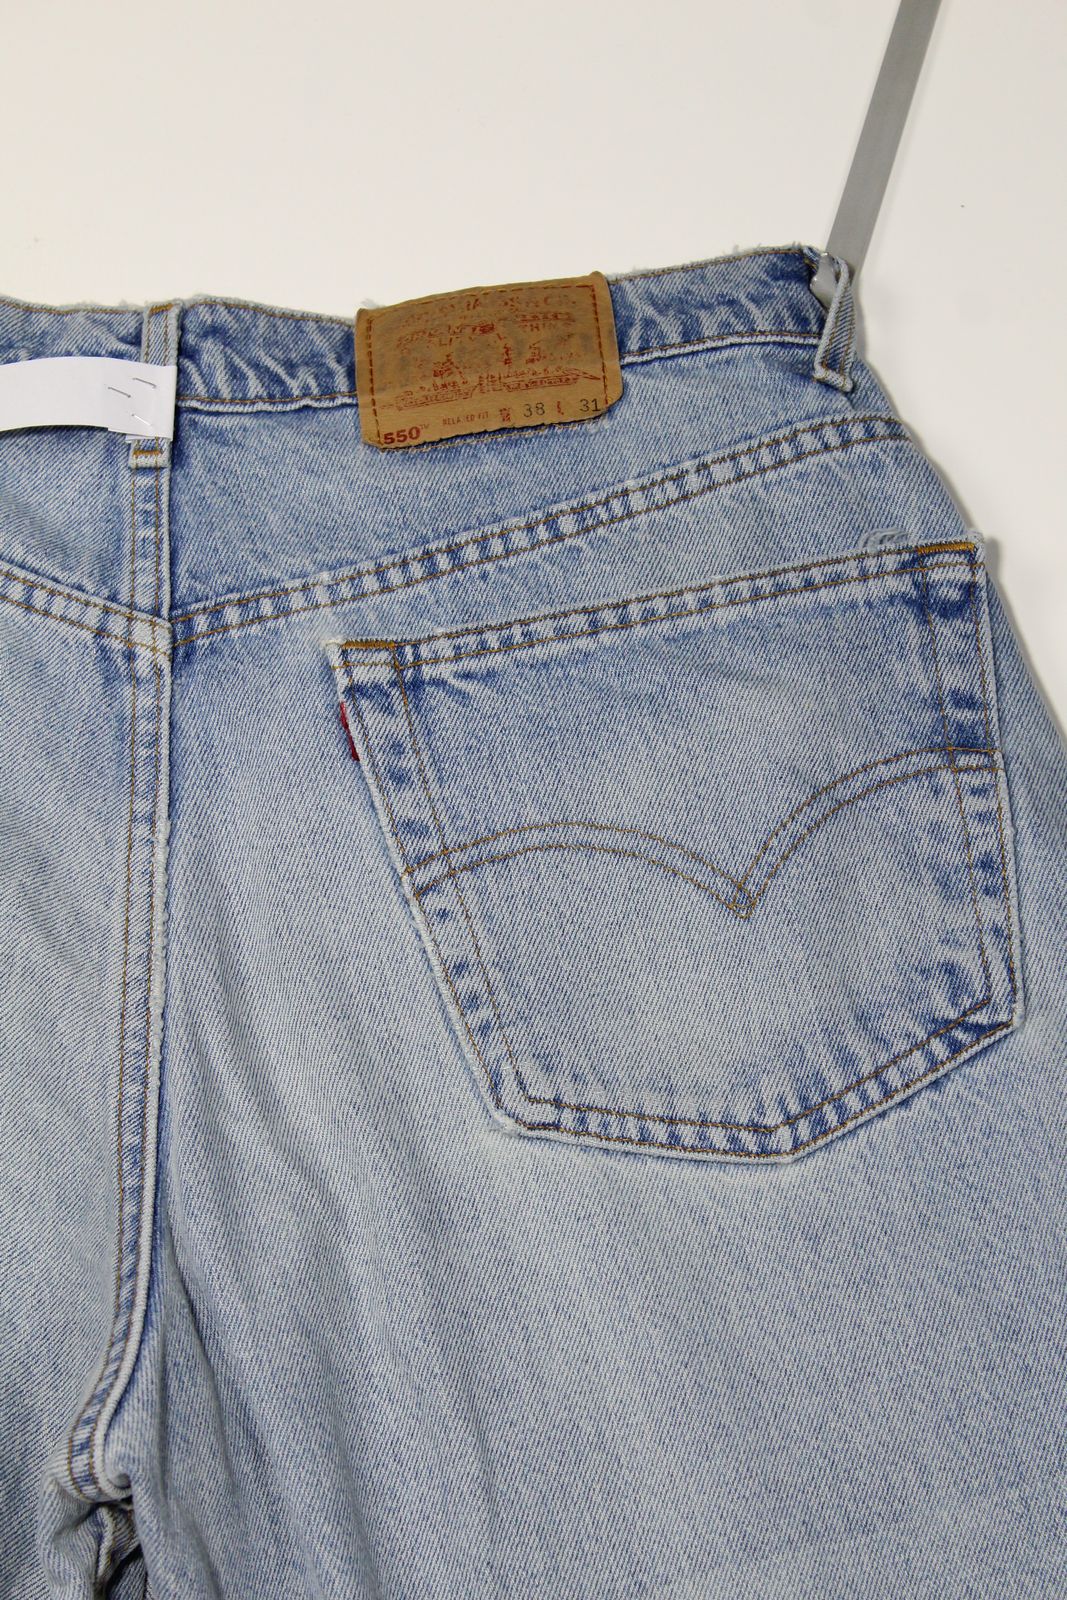 Levi's 550 Relaxed Fit Made In USA W38 L31 Vintage